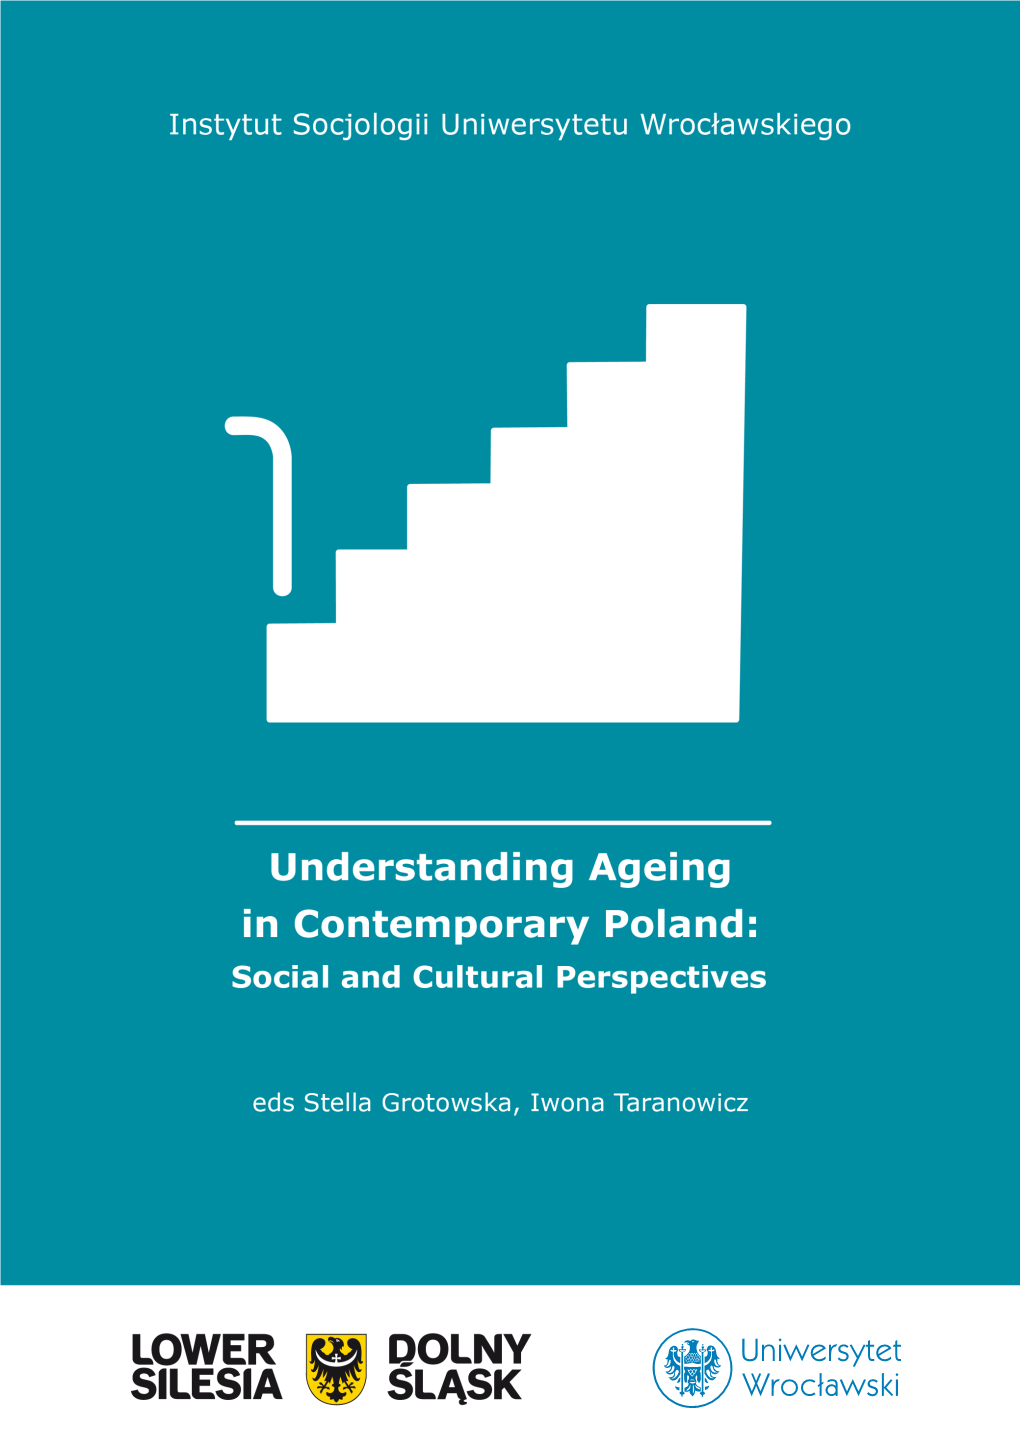 Understanding Ageing in Contemporary Poland: Social And